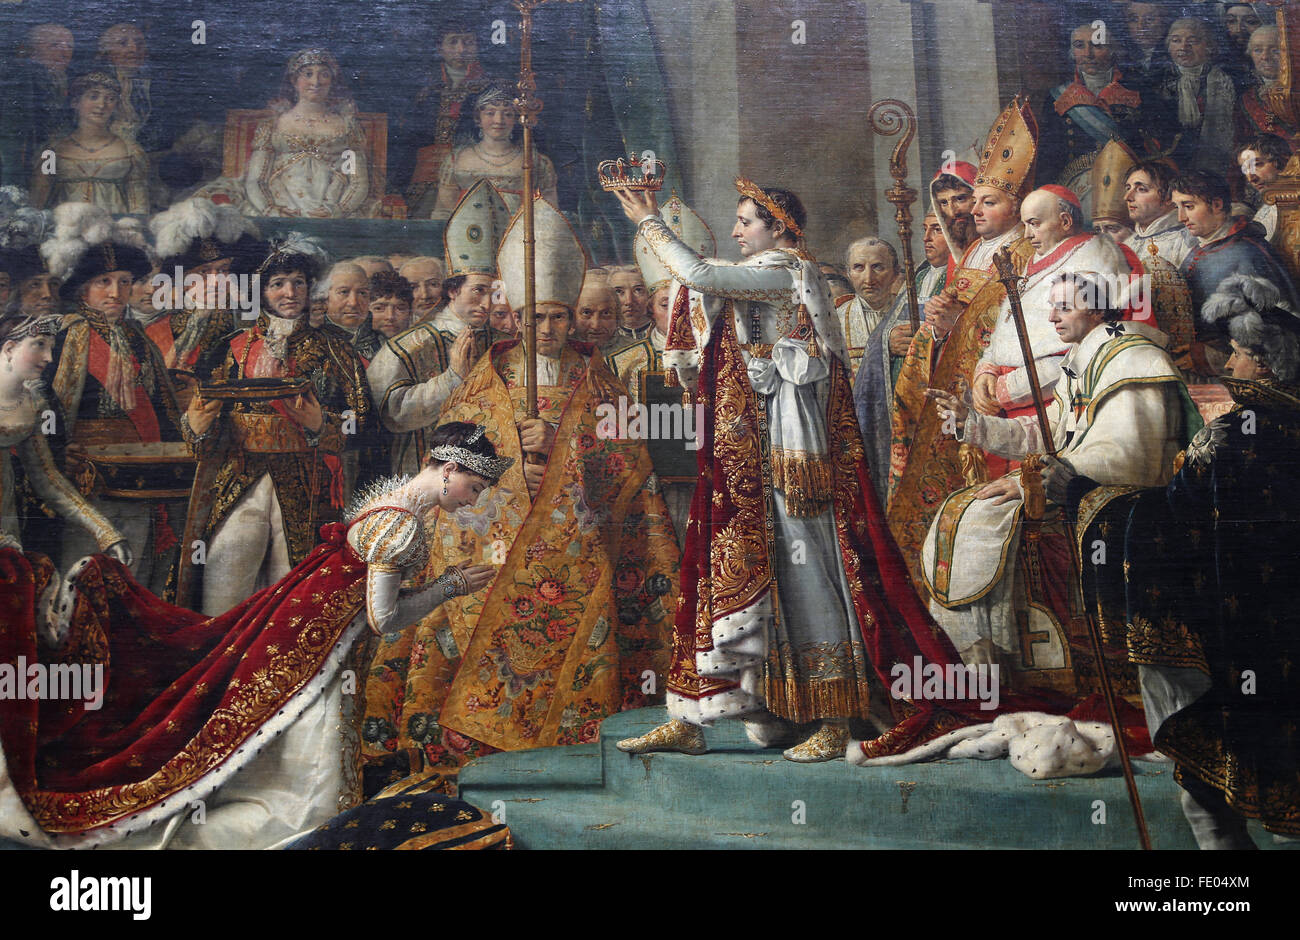 The Coronation of Napoleon(1769-1821) by Jacques-Louis David (1484-1825) in the Cathedral of Notre-Dame, 2 December 1804, Paris. Stock Photo